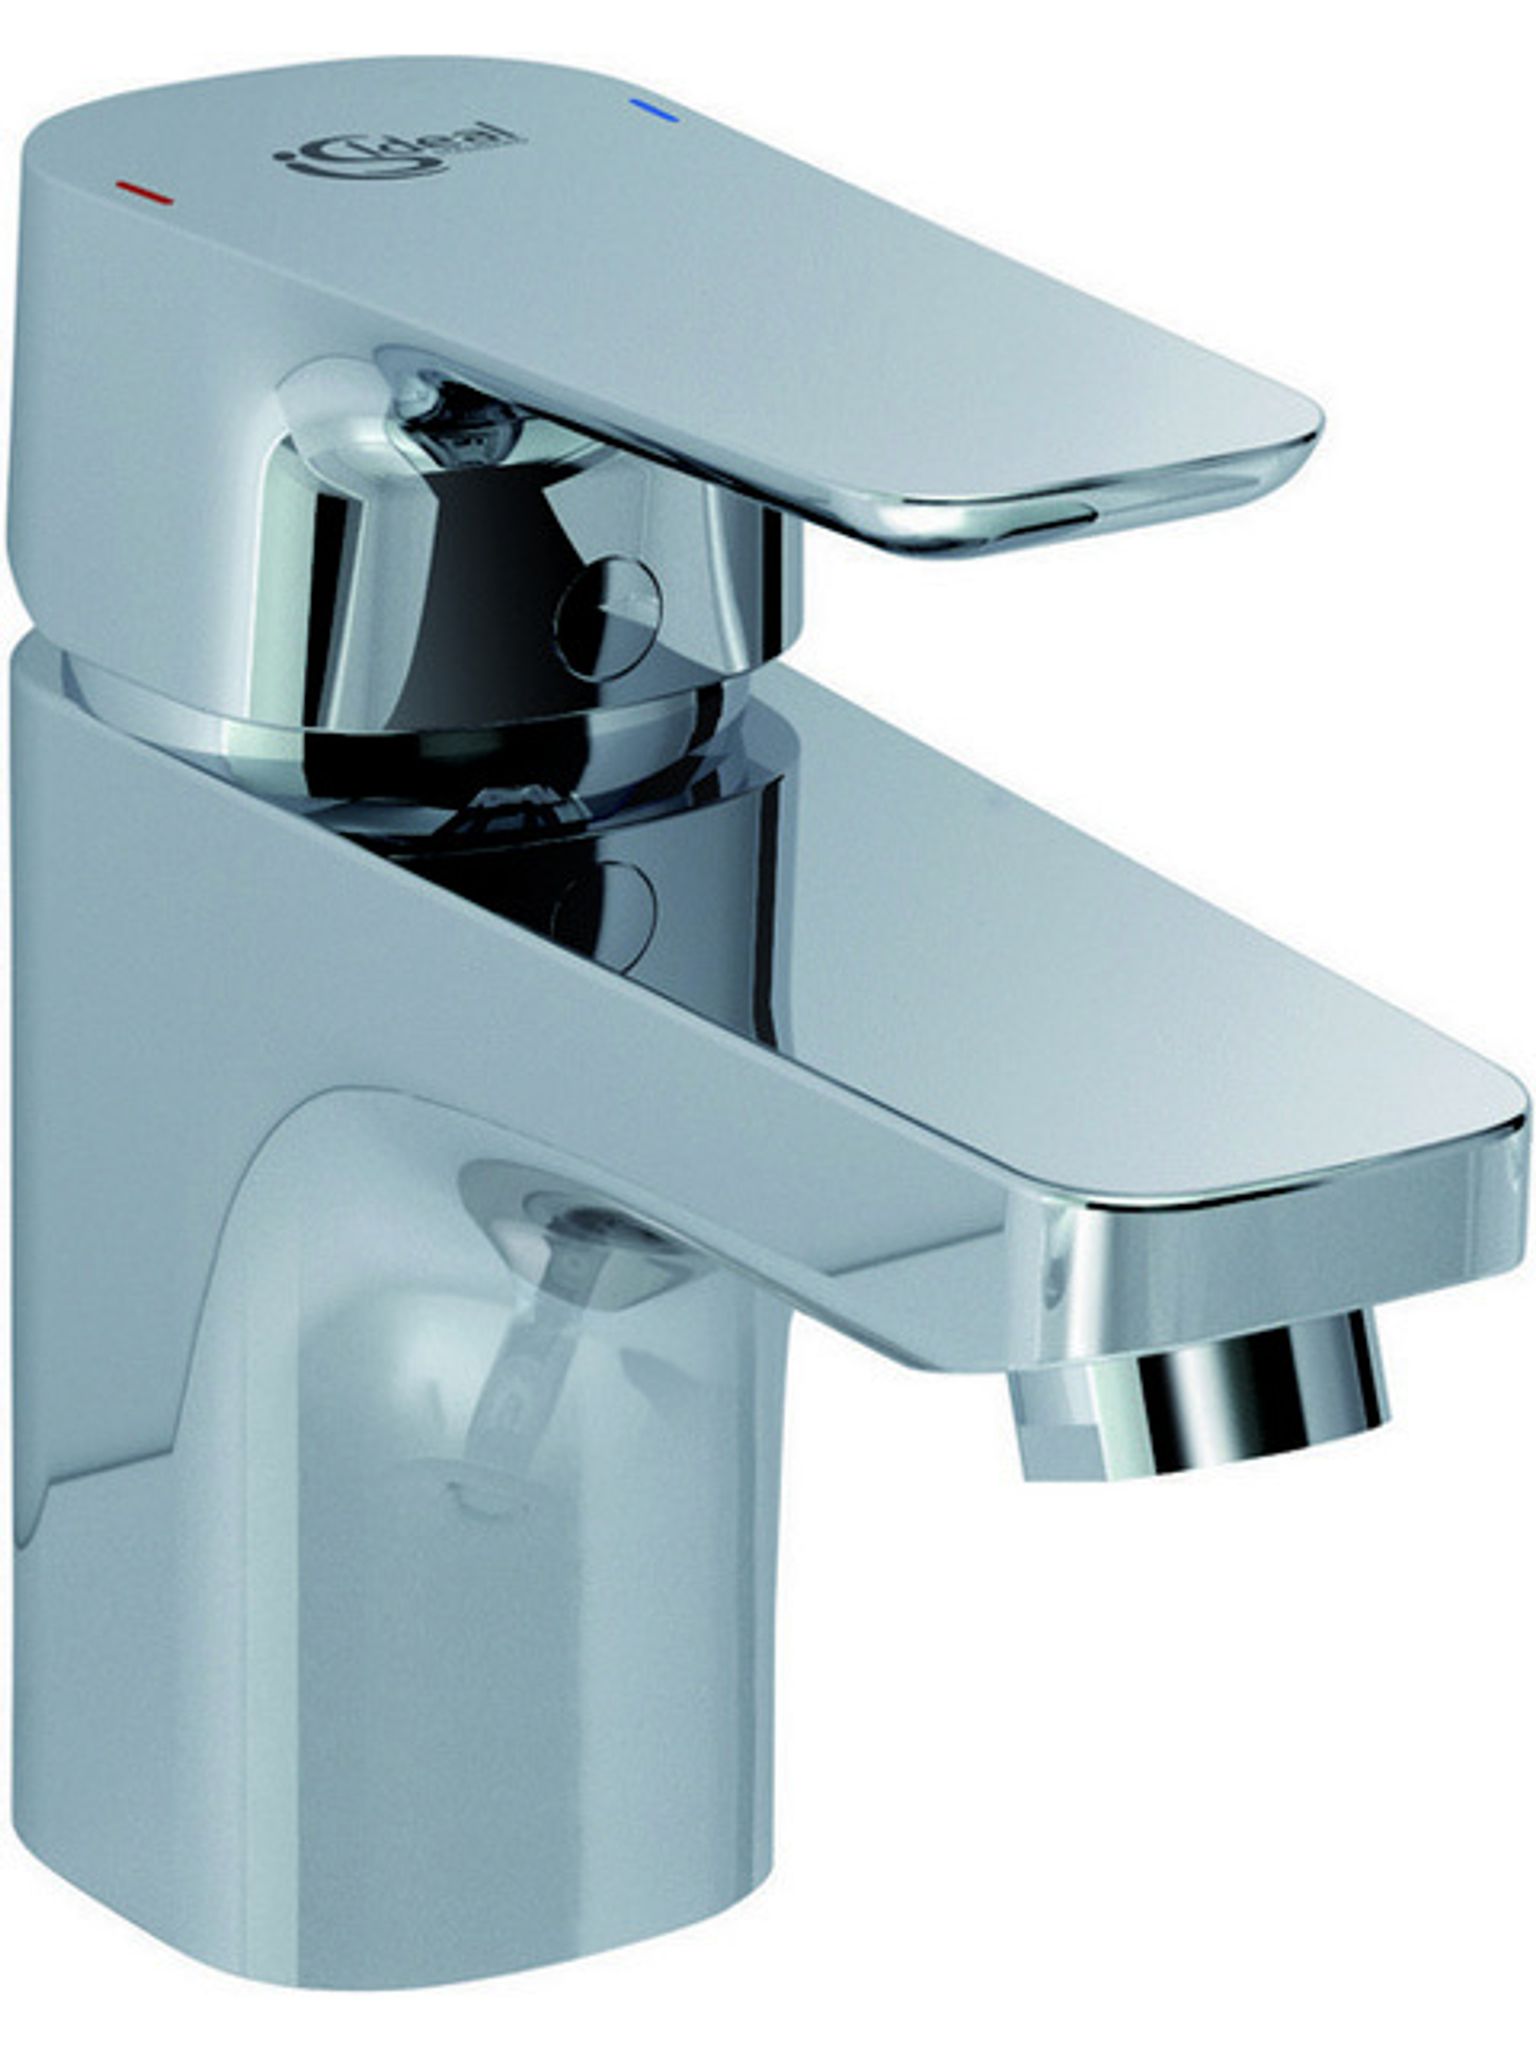 Picture of IDEAL STANDARD Ceraplan III basin mixer B0700AA chrome